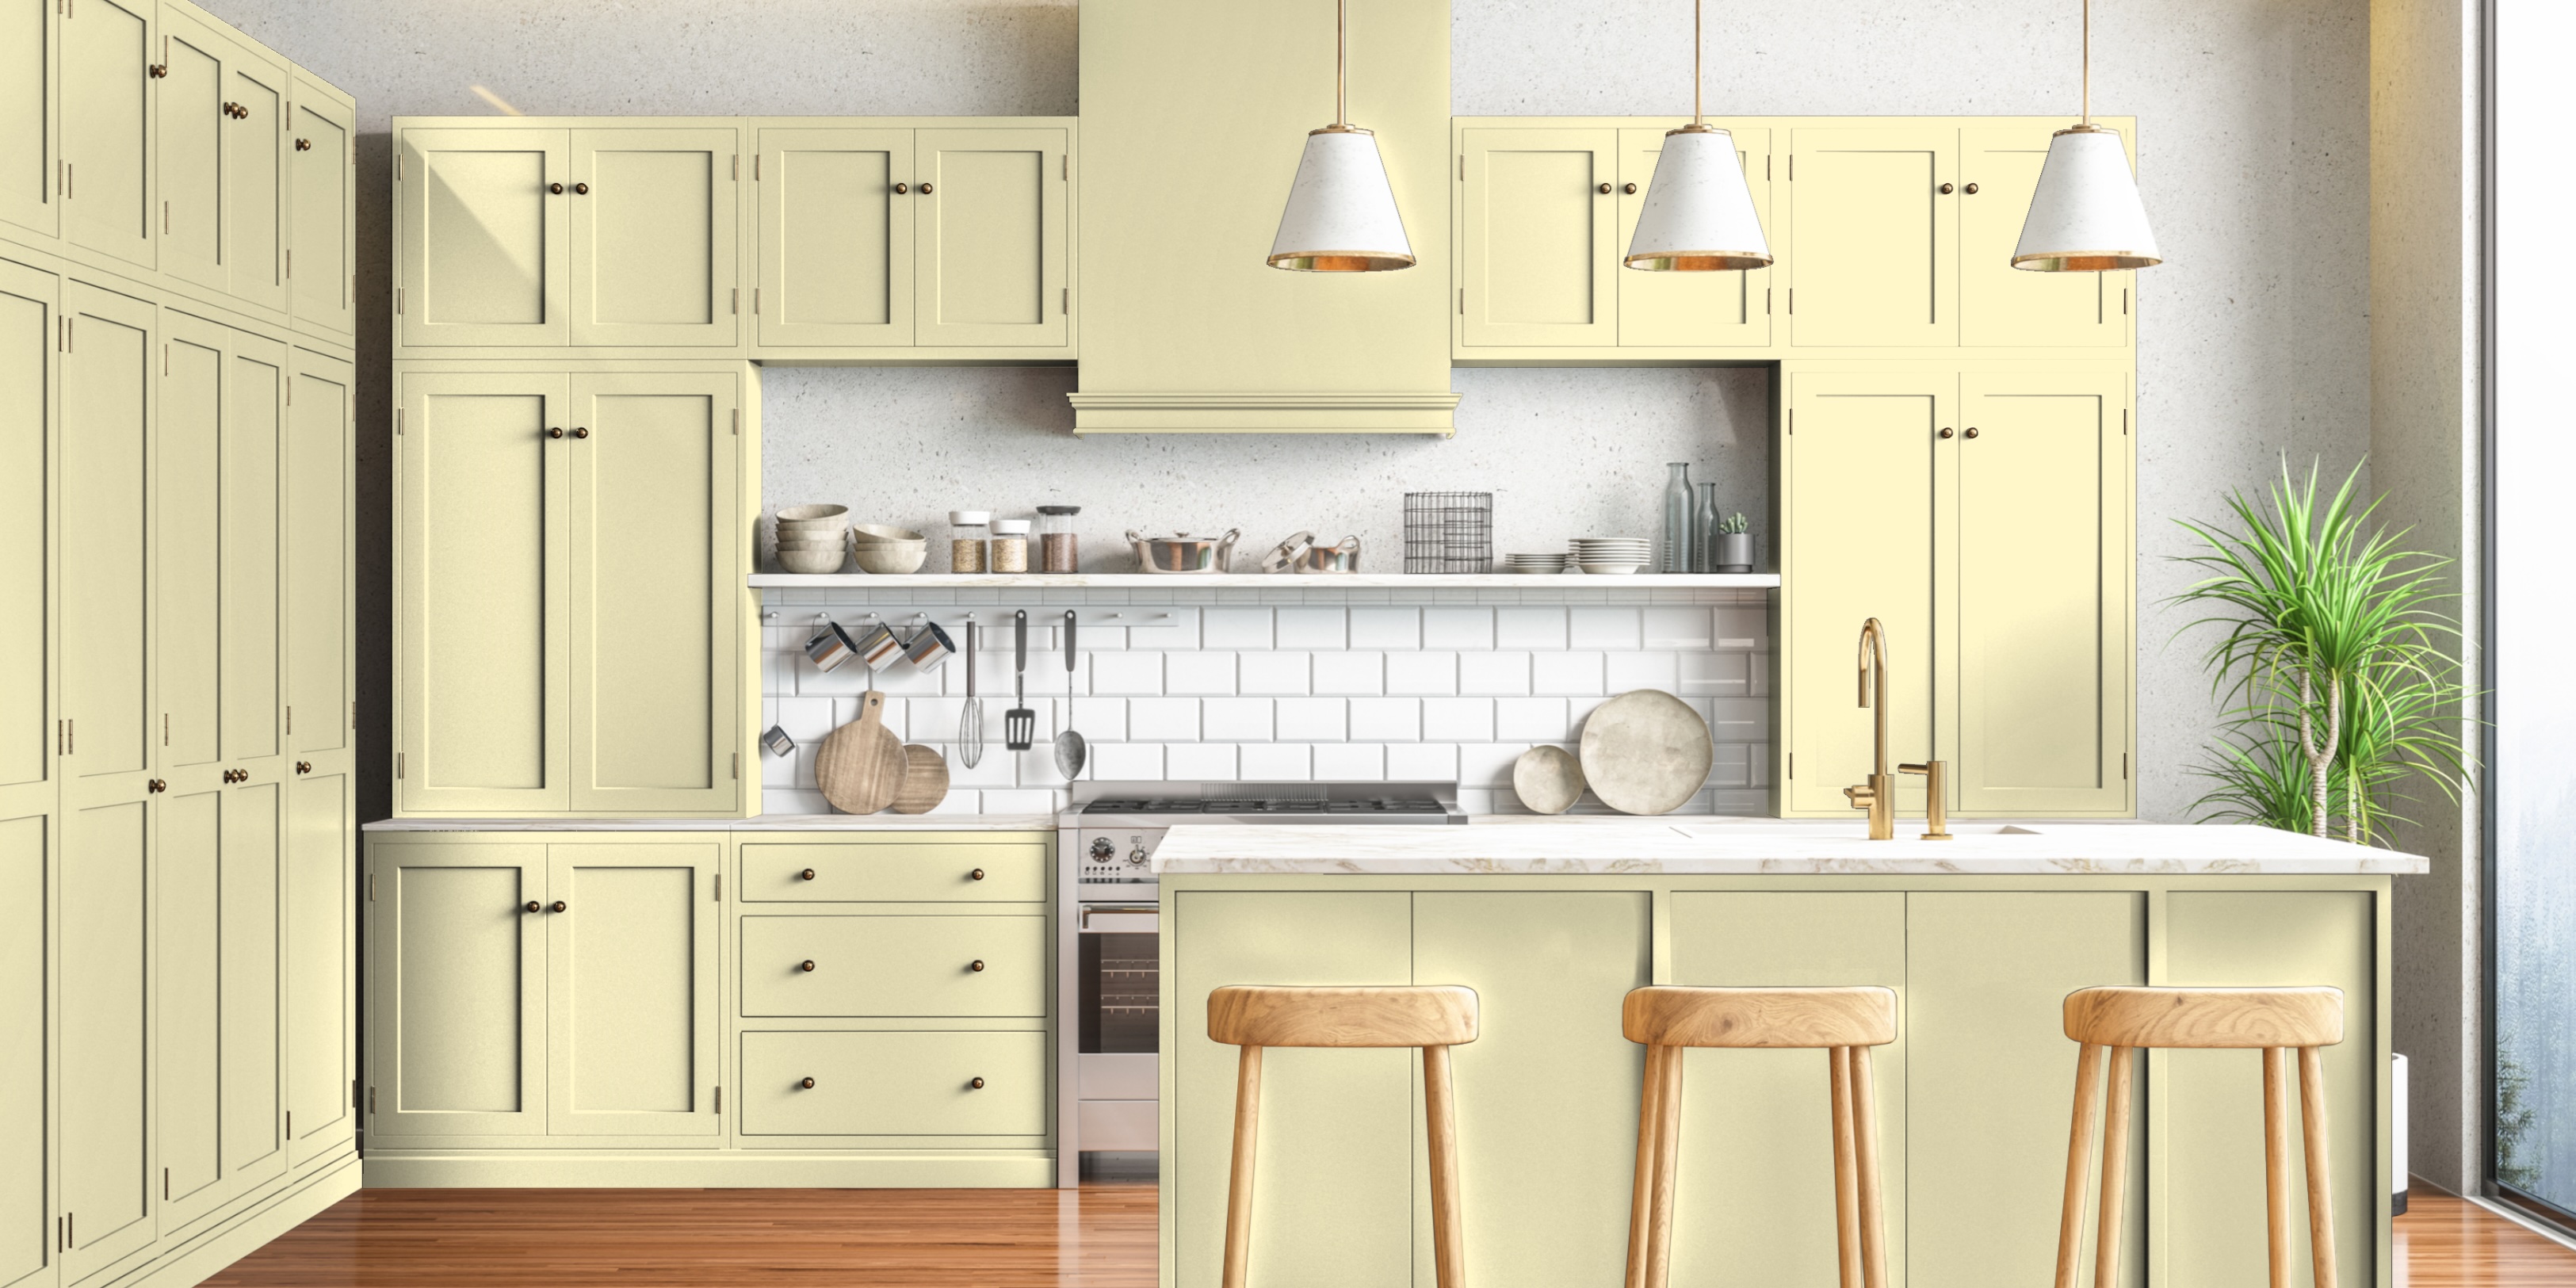 Sunny, energetic kitchen atmosphere using ECOS Paints